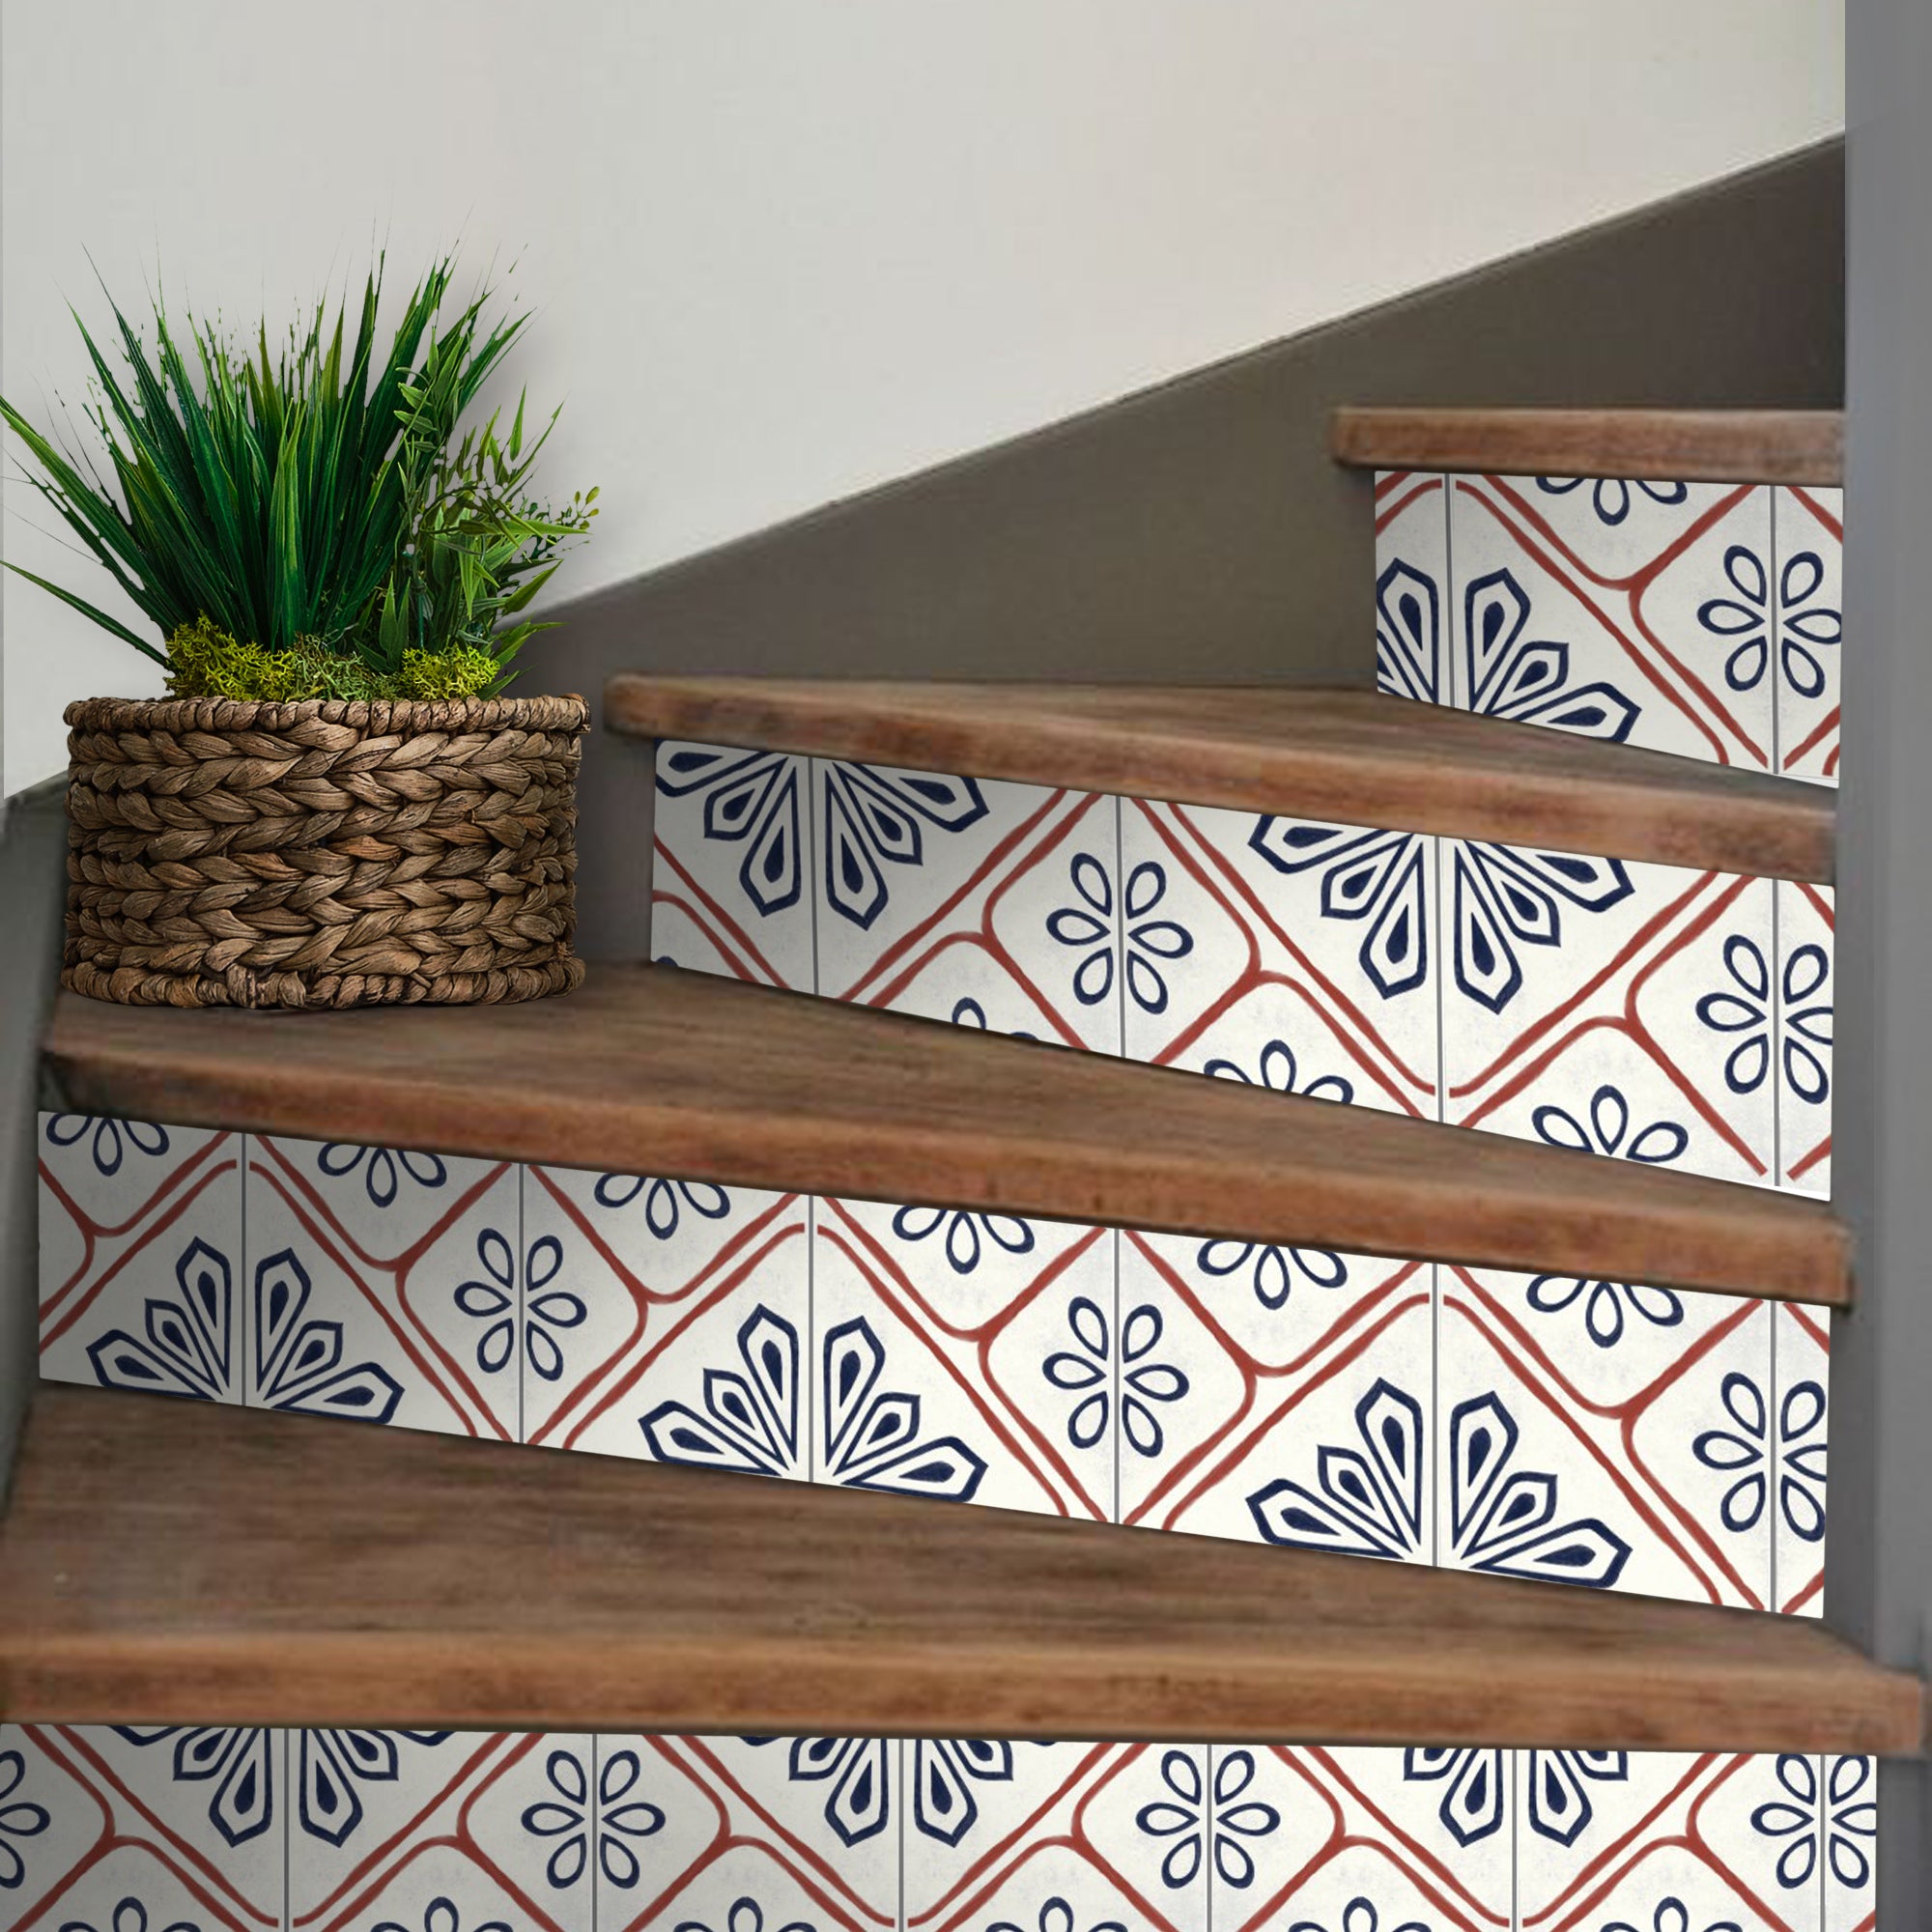 PROMO! Gaia Stair Riser Stickers - 6 strips in 7" height x 48" long